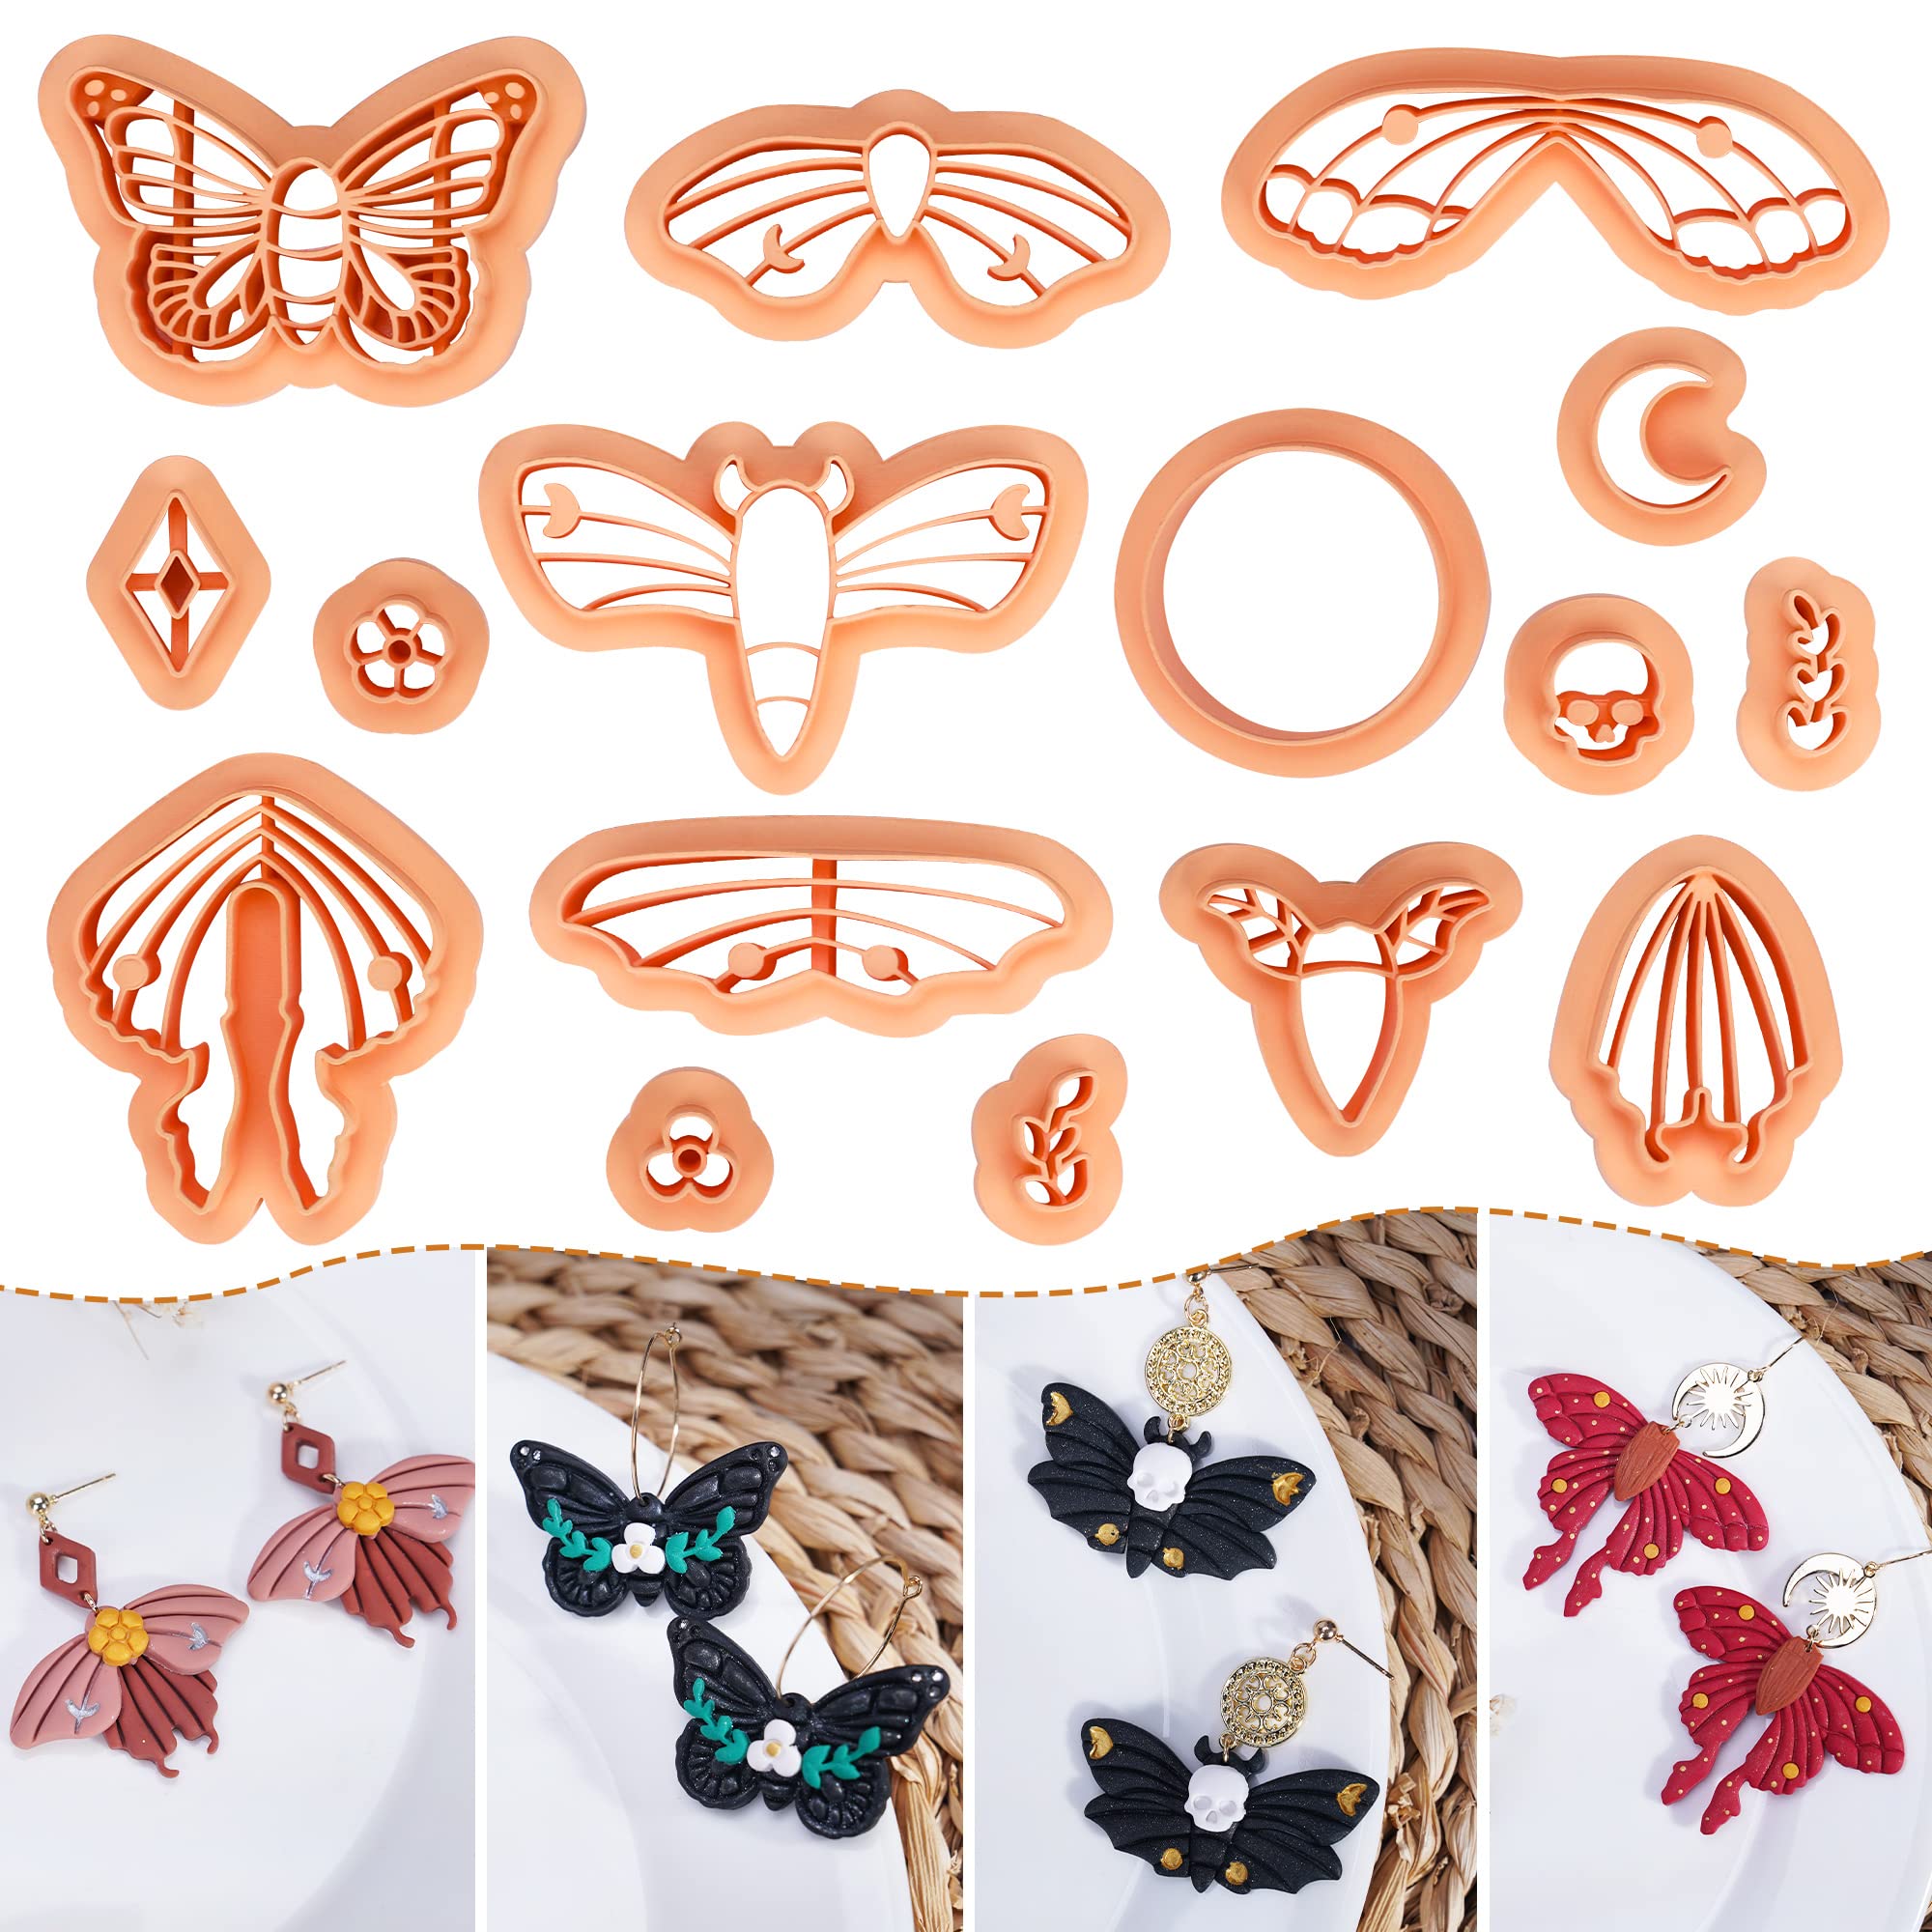 Puocaon Polymer Clay Cutters Luna Moth 16 Shapes